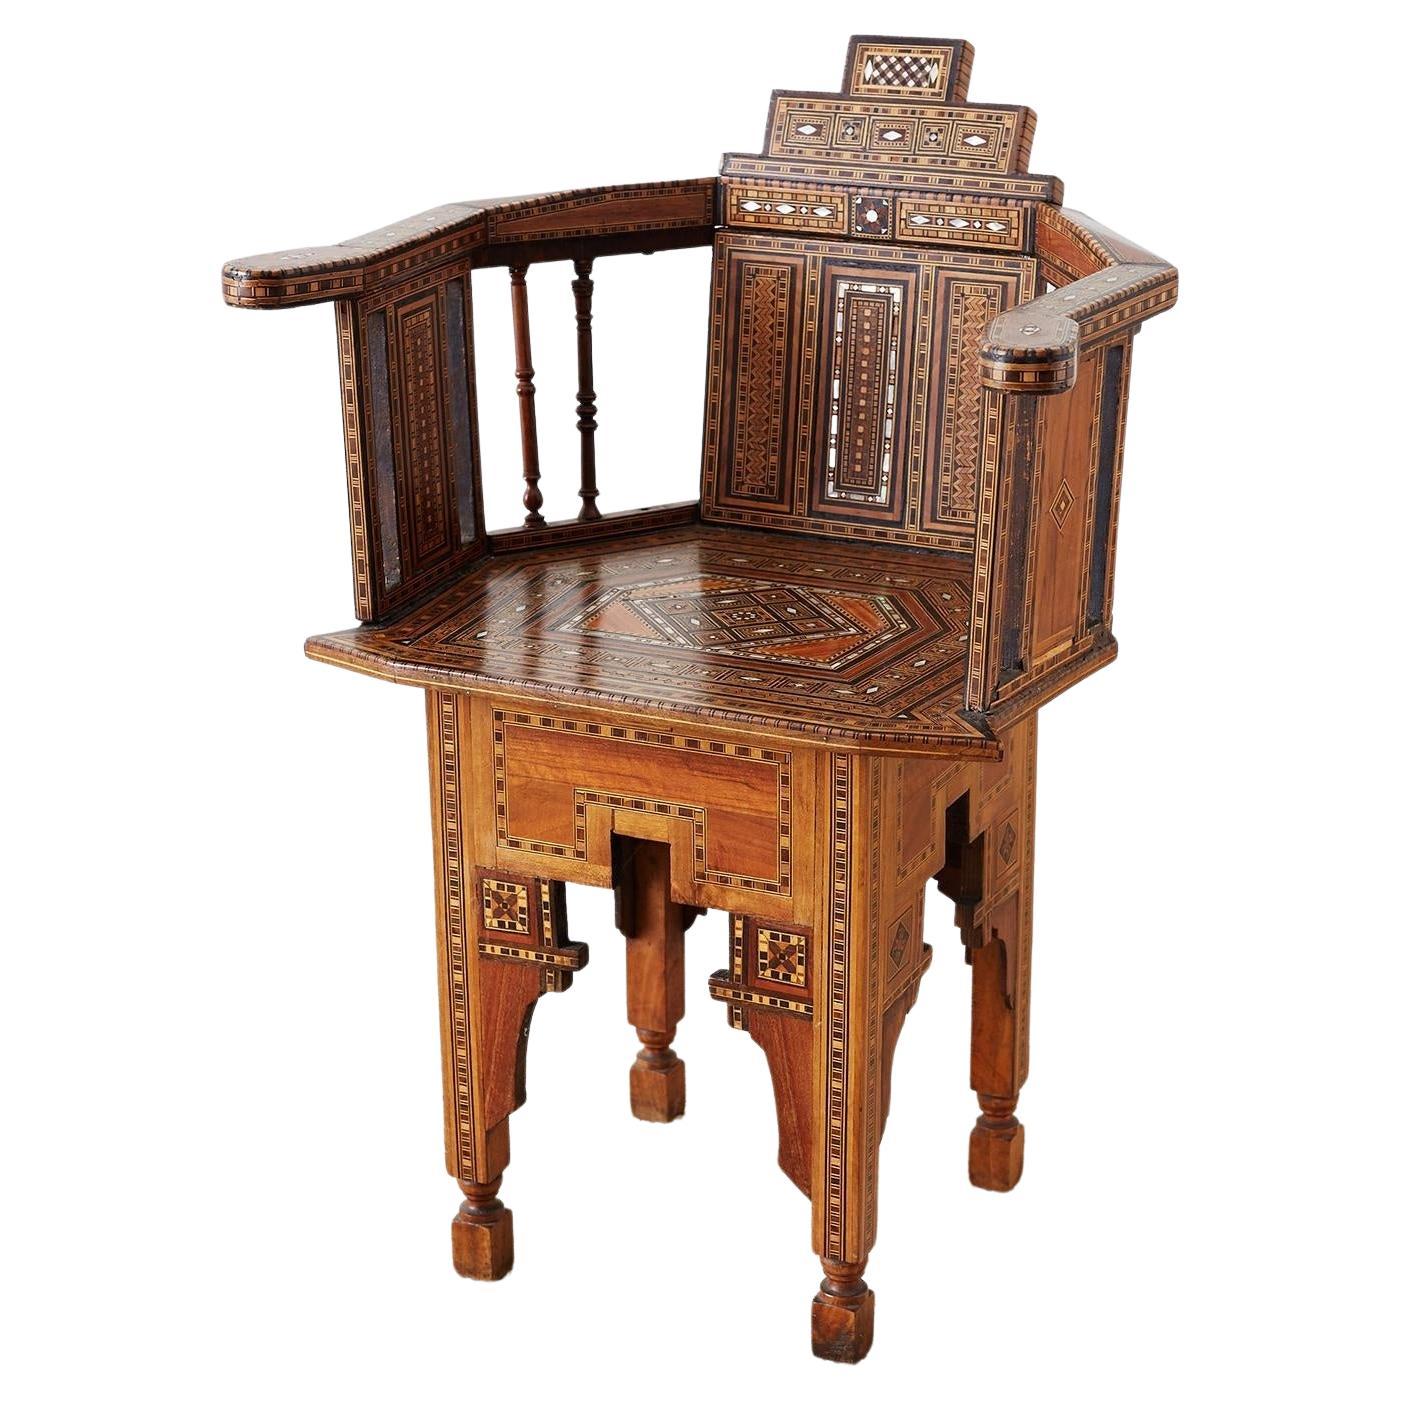 Syrian Armchair With Inlay Moorish Designs For Sale